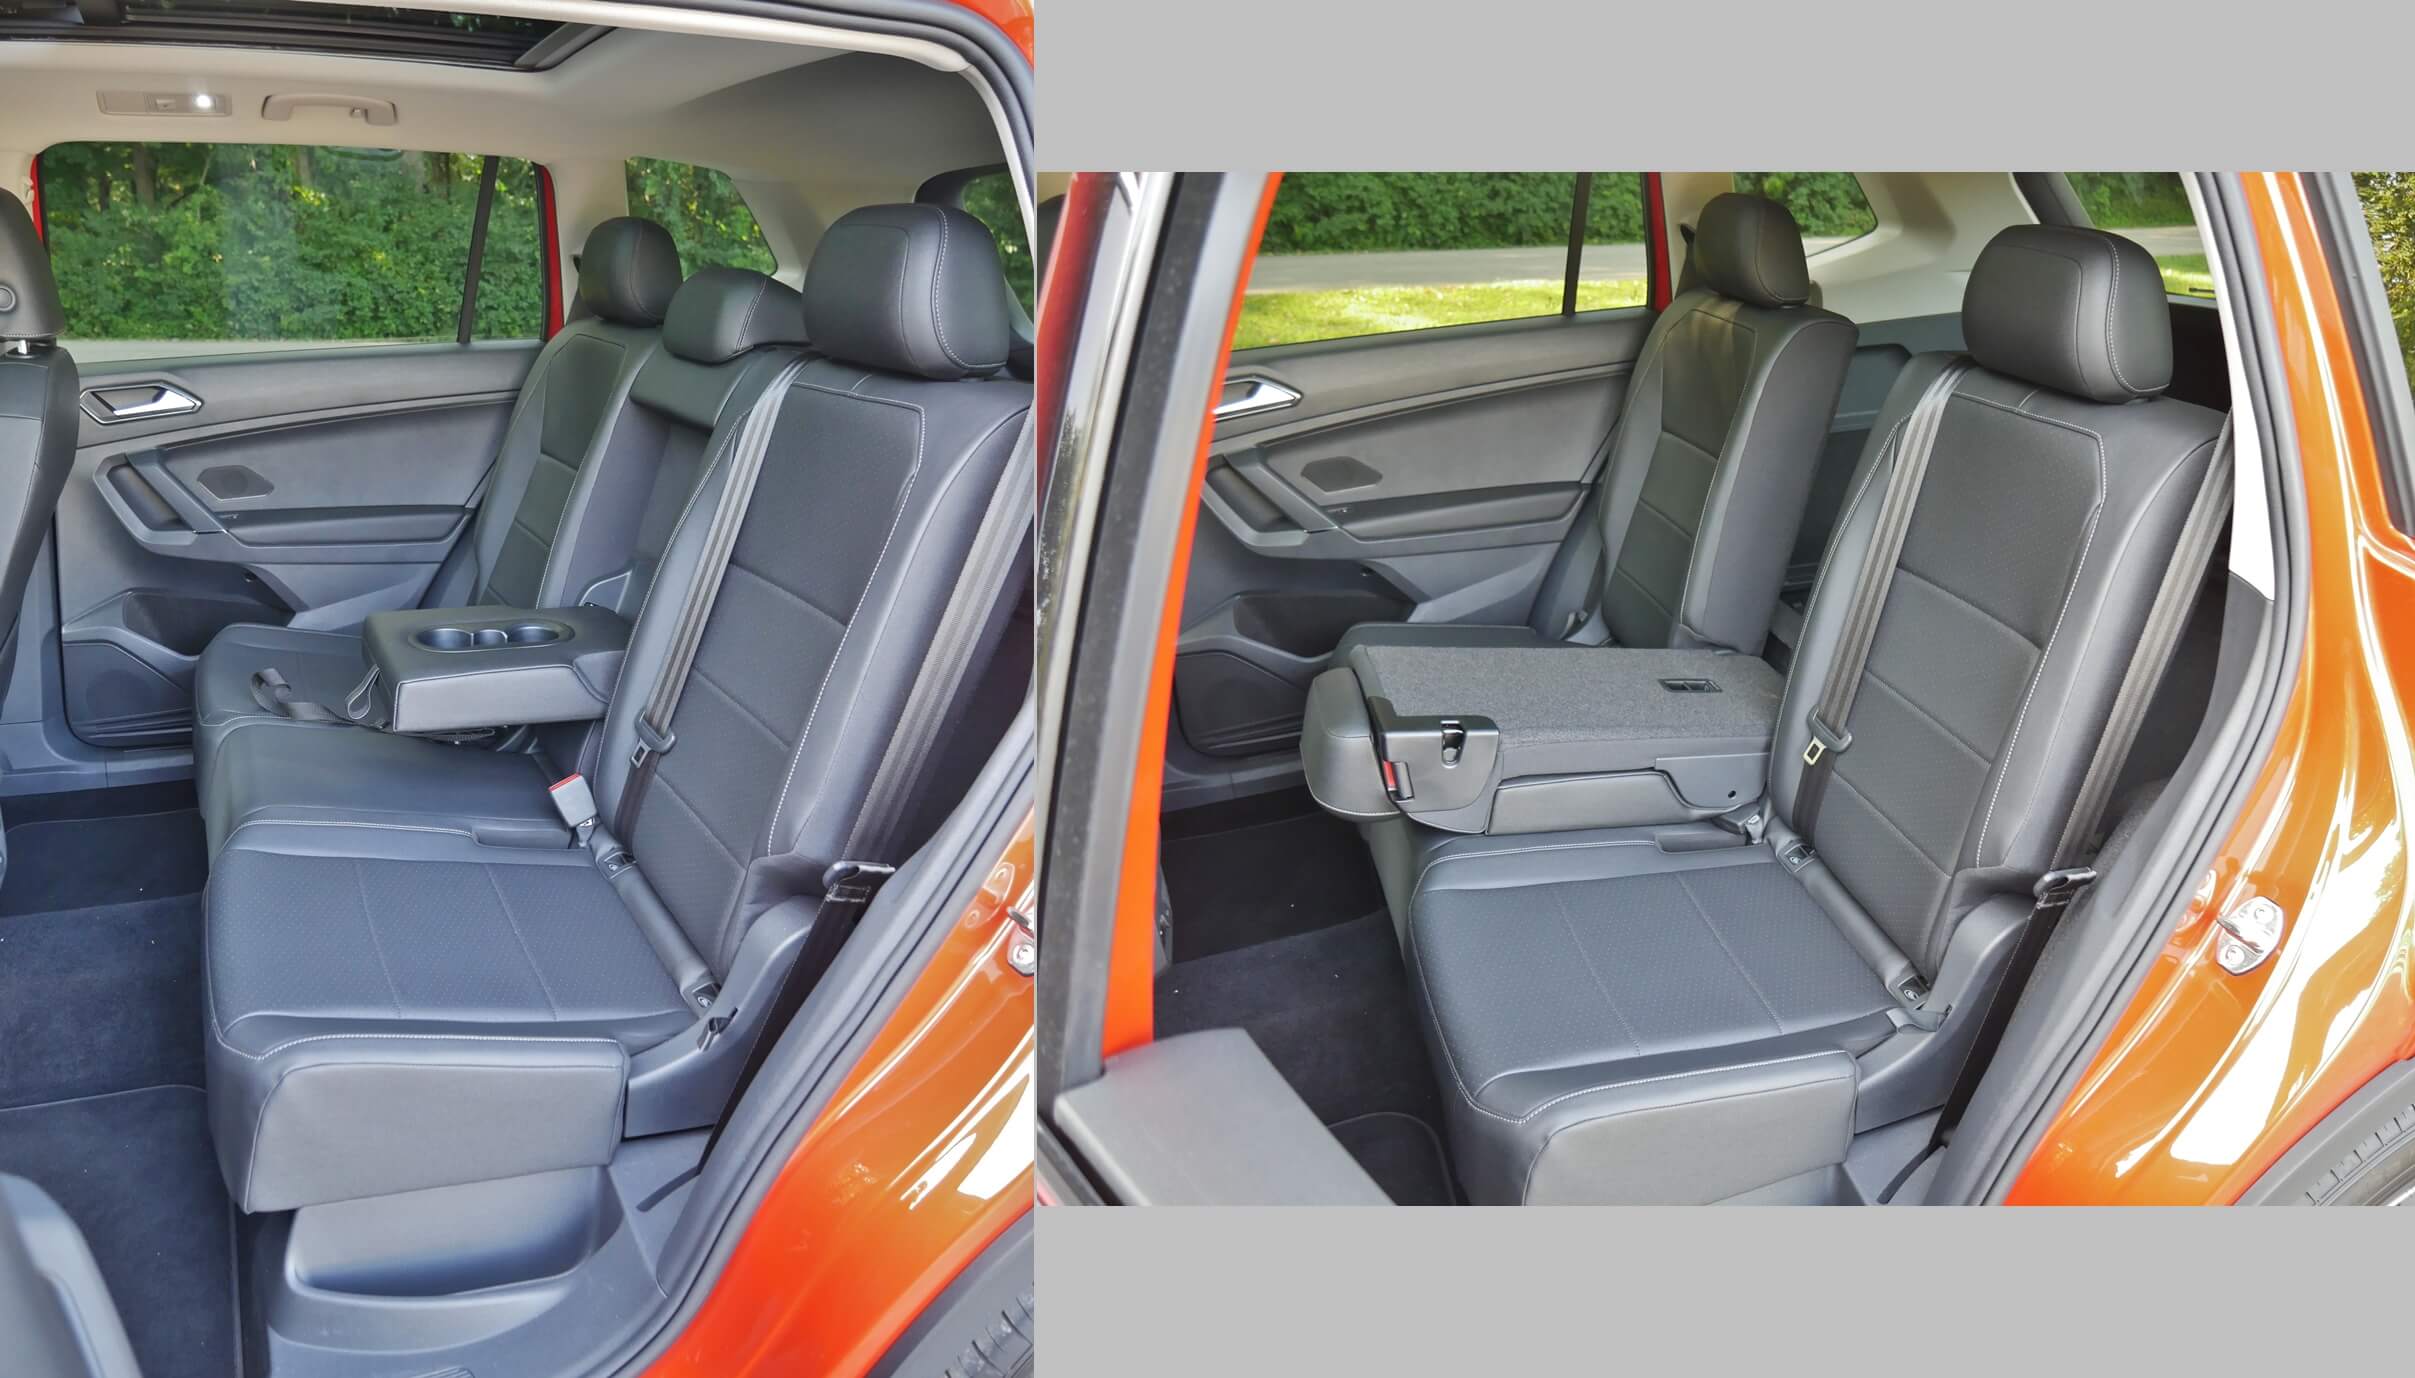 2018 Volkswagen Tiguan SE AWD: 2nd Row legroom gains 2.8"-inches and sliding split bench, with 40/20/40% split folding seat backs